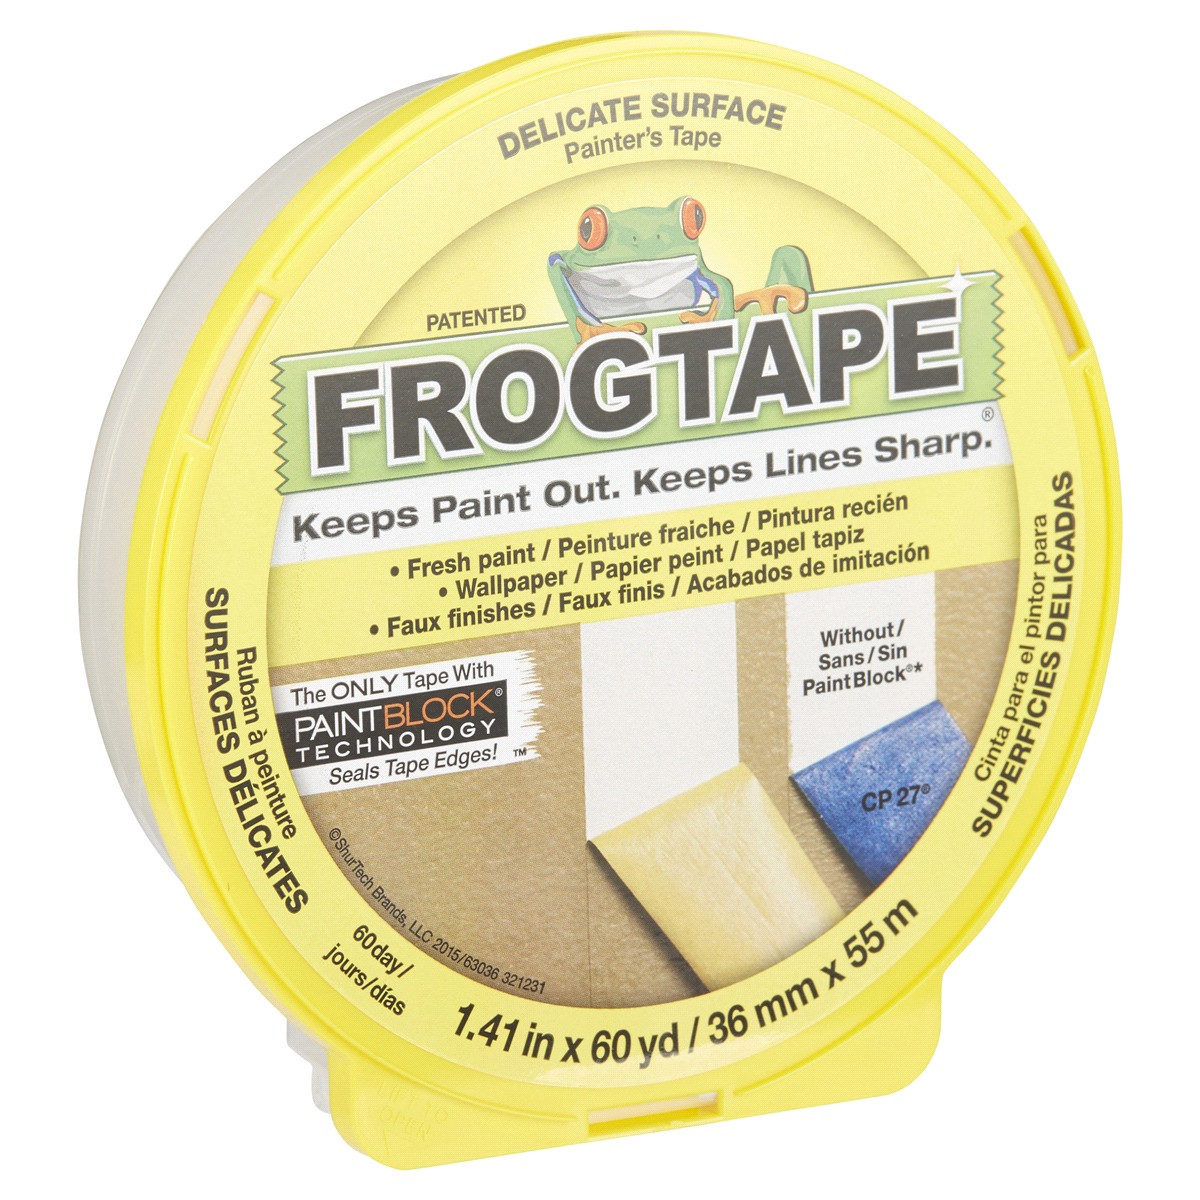 slide 25 of 29, DUCK FrogTape Delicate Surface Painting Tape, Yellow, 1.41 in. x 60 yd., 60 yd x 1.31 in